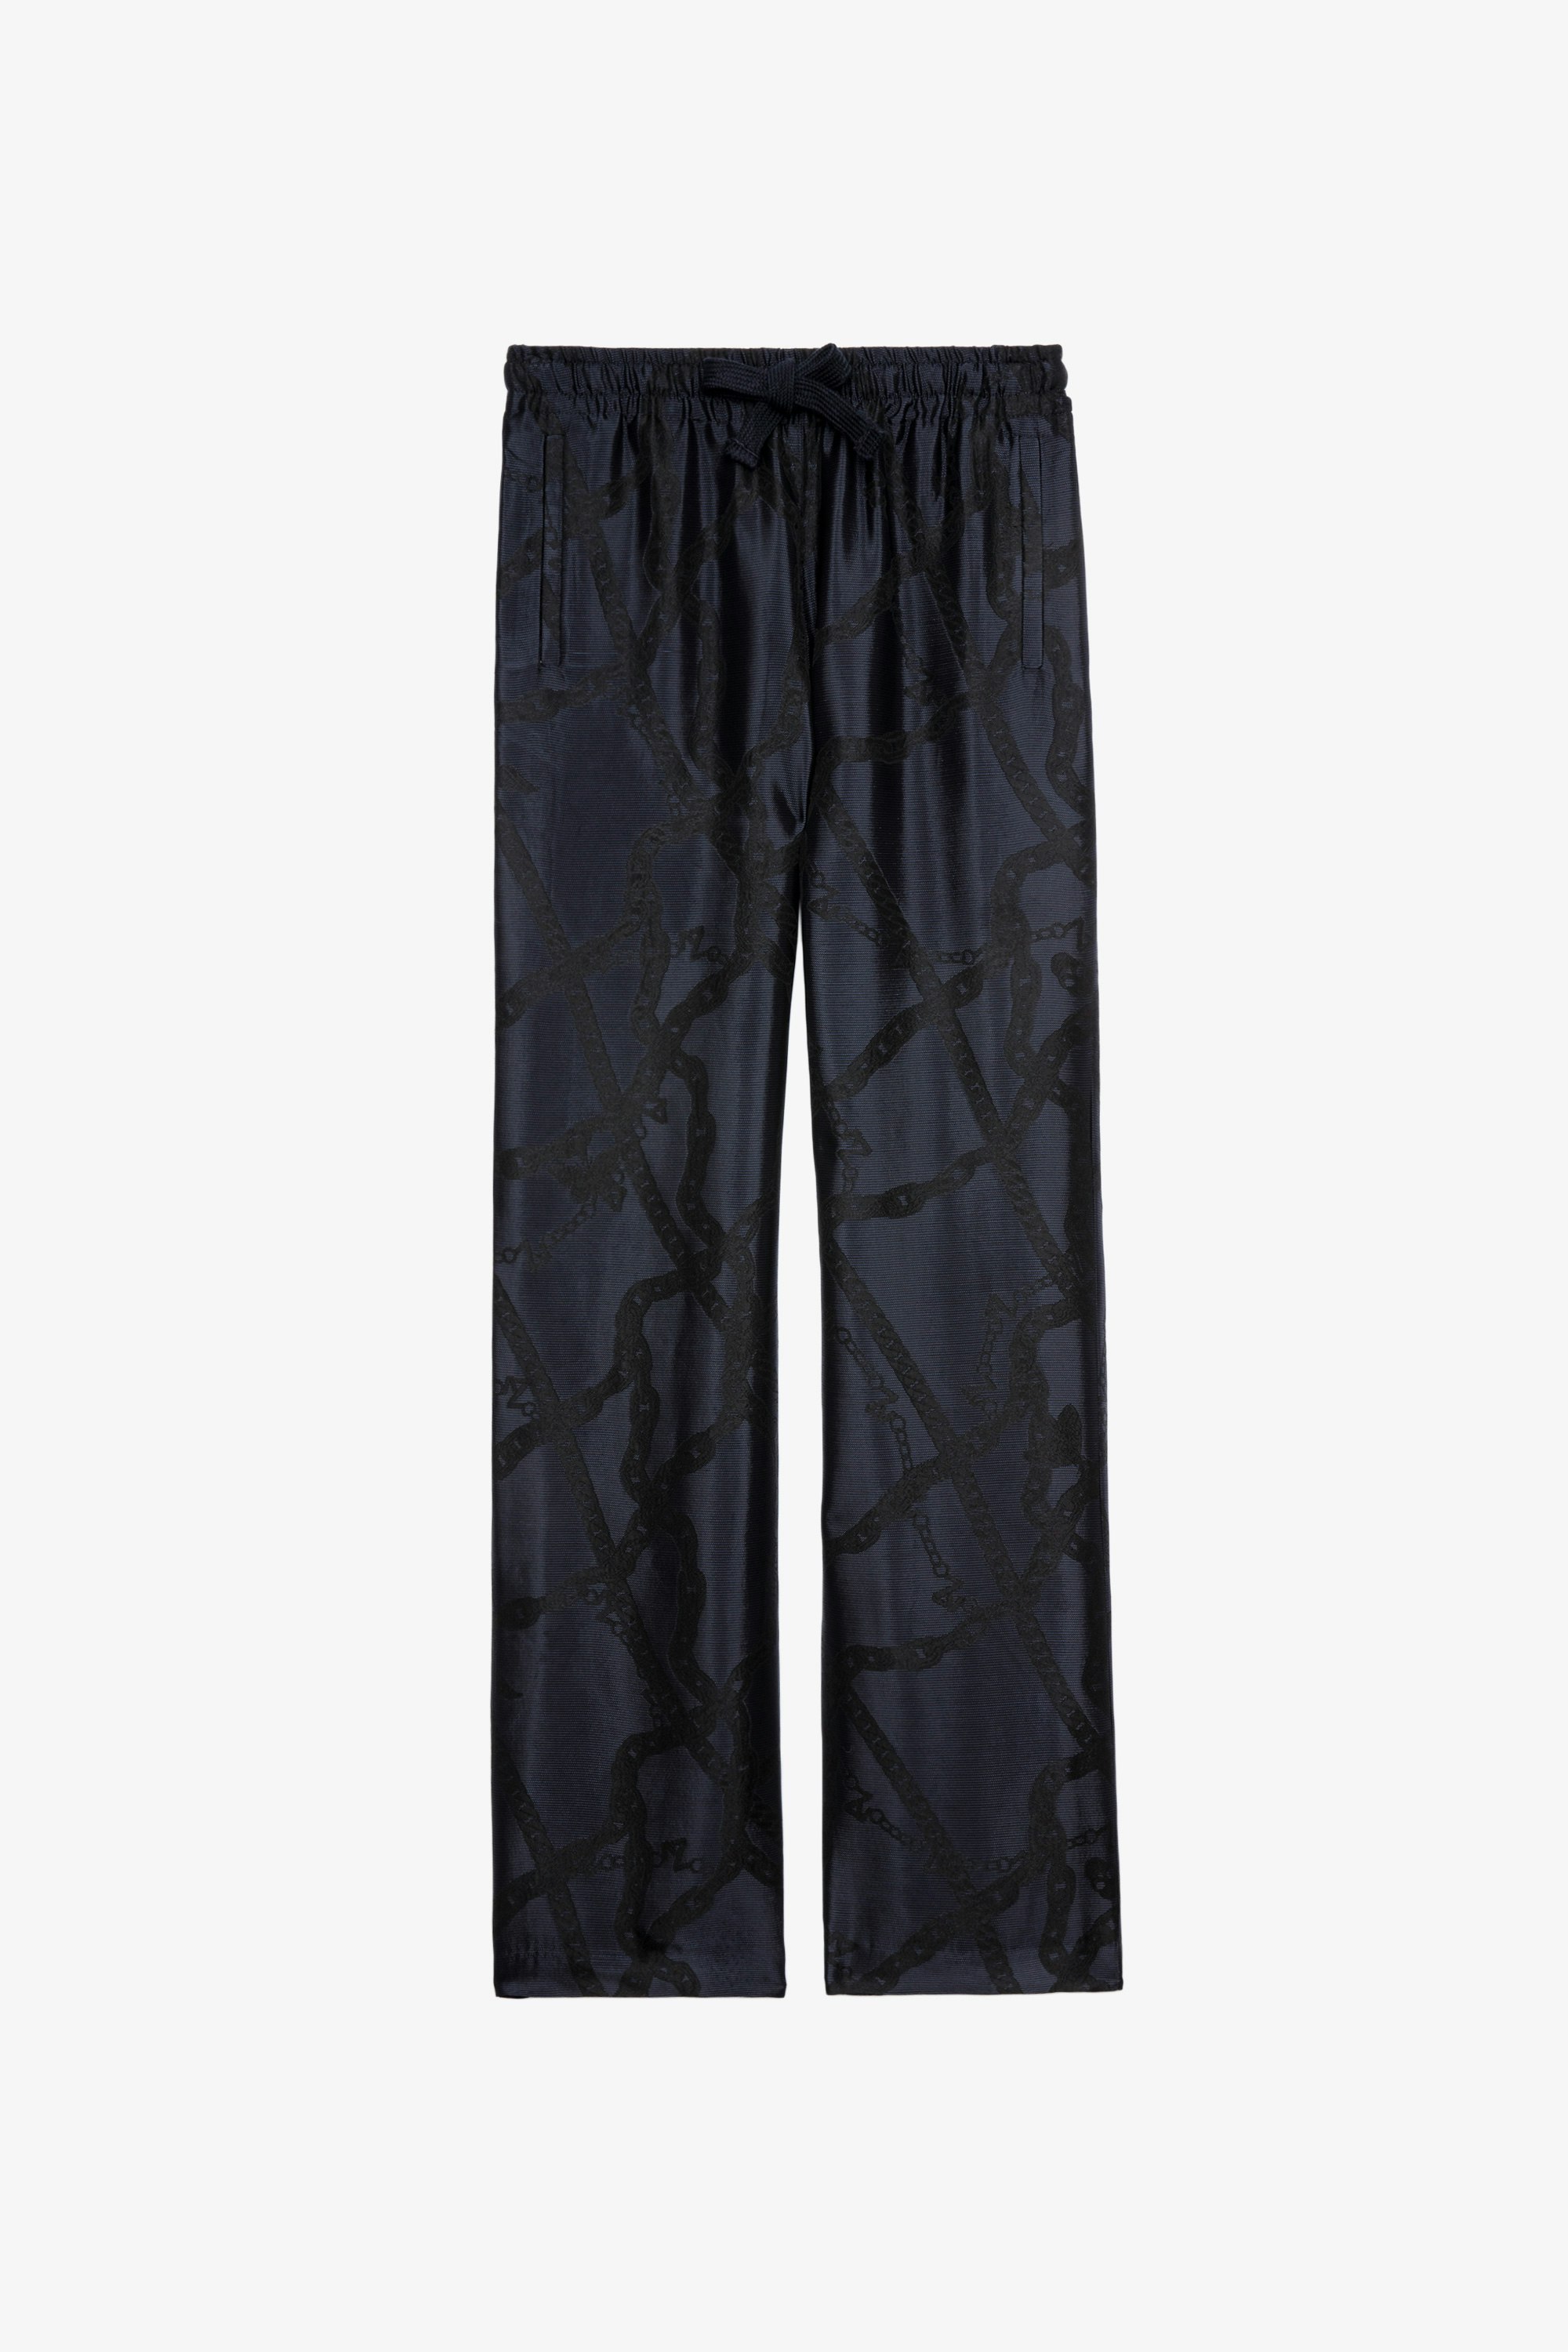 Pomy Jac Chains Trousers Women's navy blue satiny trousers with jacquard detailing 